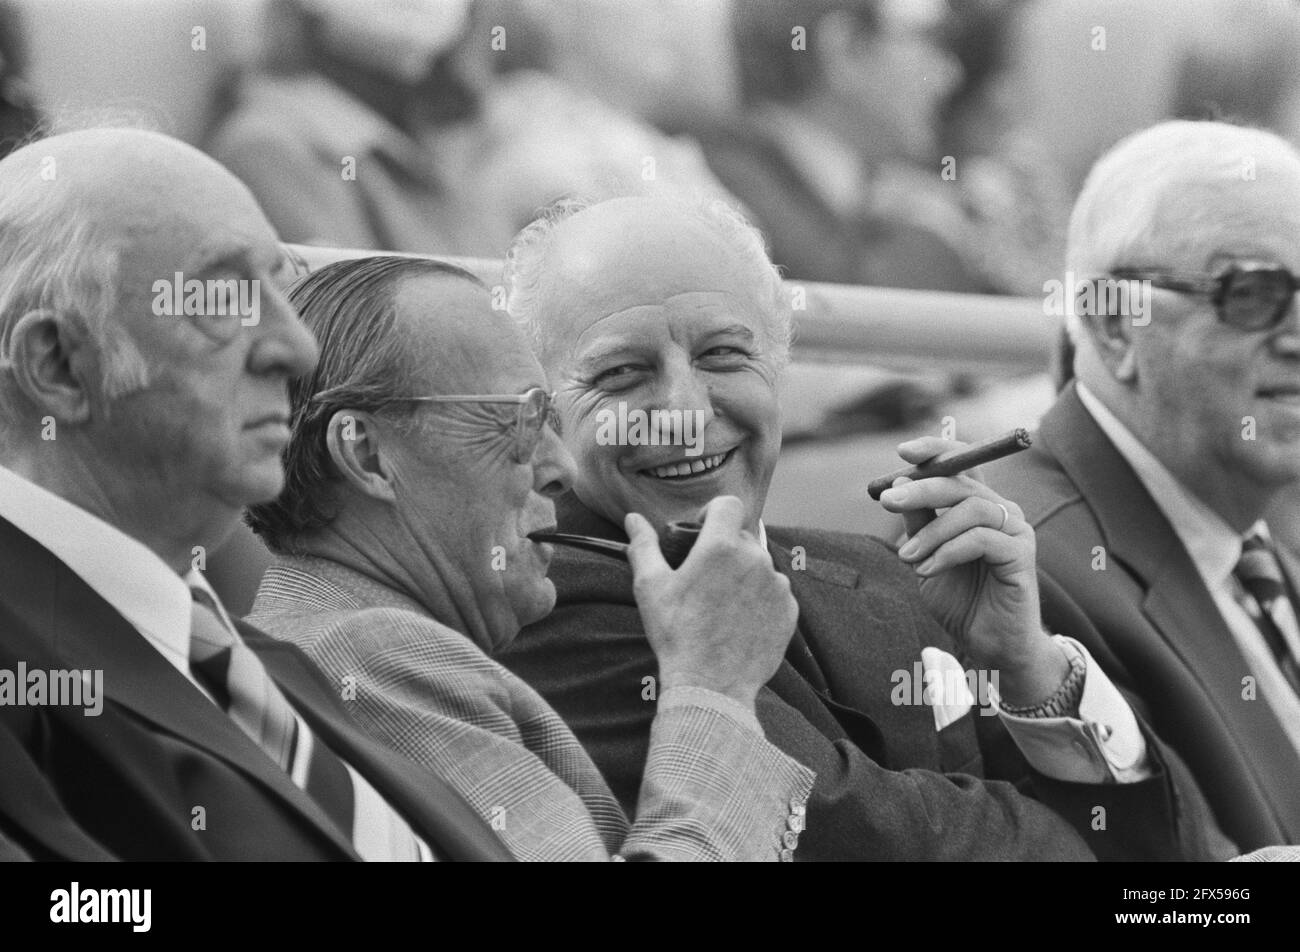 Final World Cup 1974 in Munich, West Germany against the Netherlands 2-1; Prince Bernhard and President Scheel, July 7, 1974, finals, sports, soccer, world championships, The Netherlands, 20th century press agency photo, news to remember, documentary, historic photography 1945-1990, visual stories, human history of the Twentieth Century, capturing moments in time Stock Photo